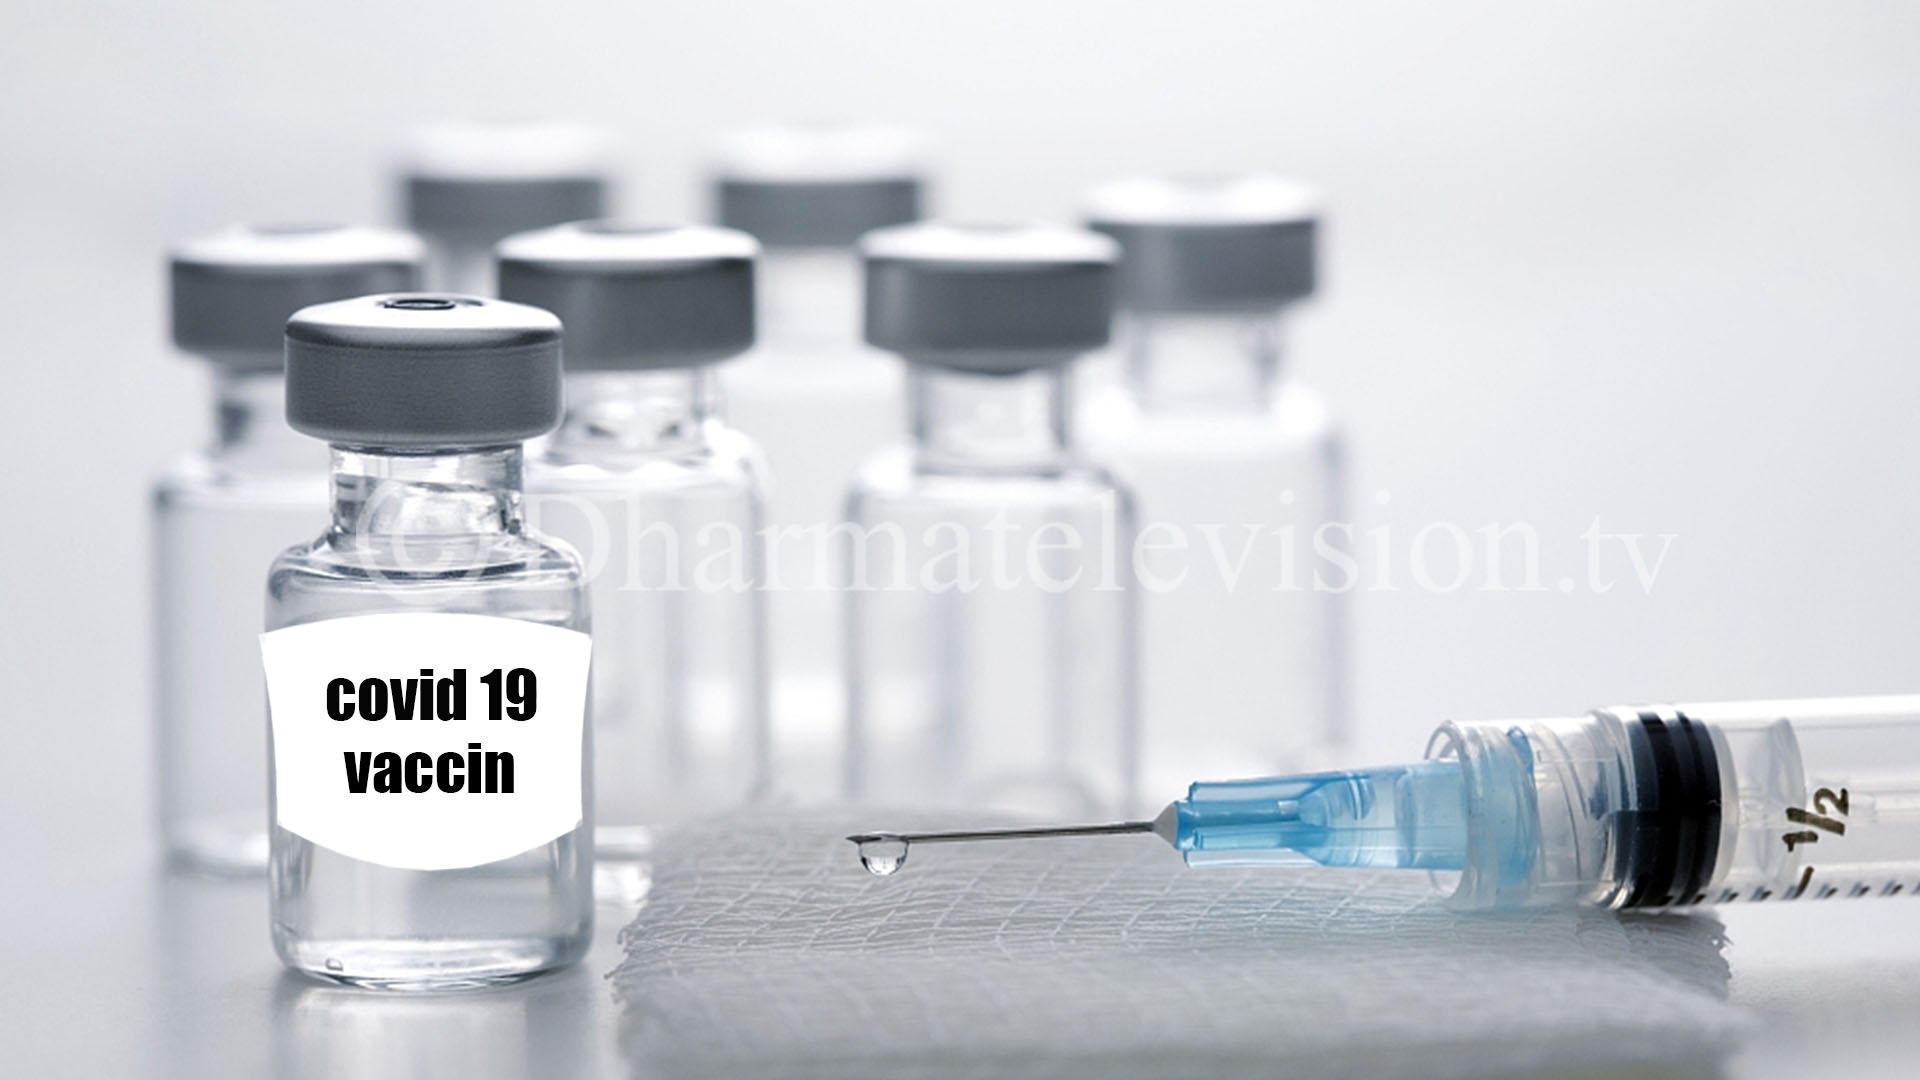 Nepal governmenr officially begins to import Covid-19 vaccines from India